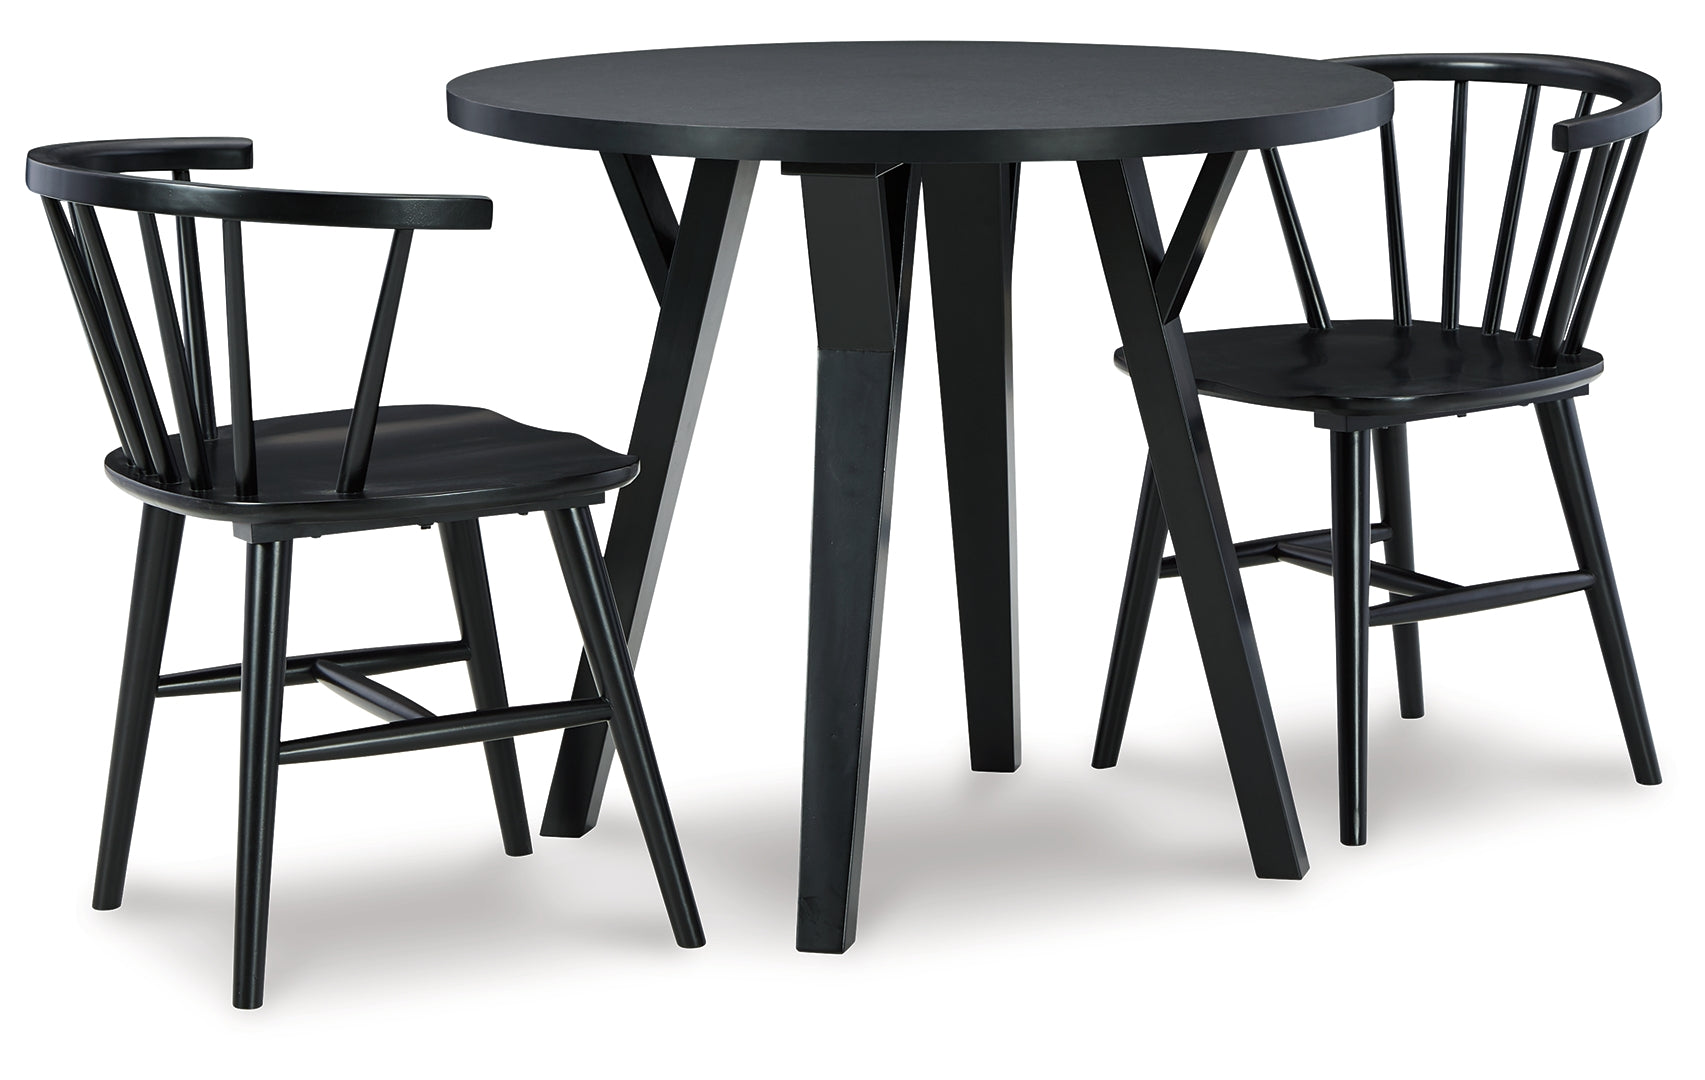 Otaska Dining Table and 2 Chairs